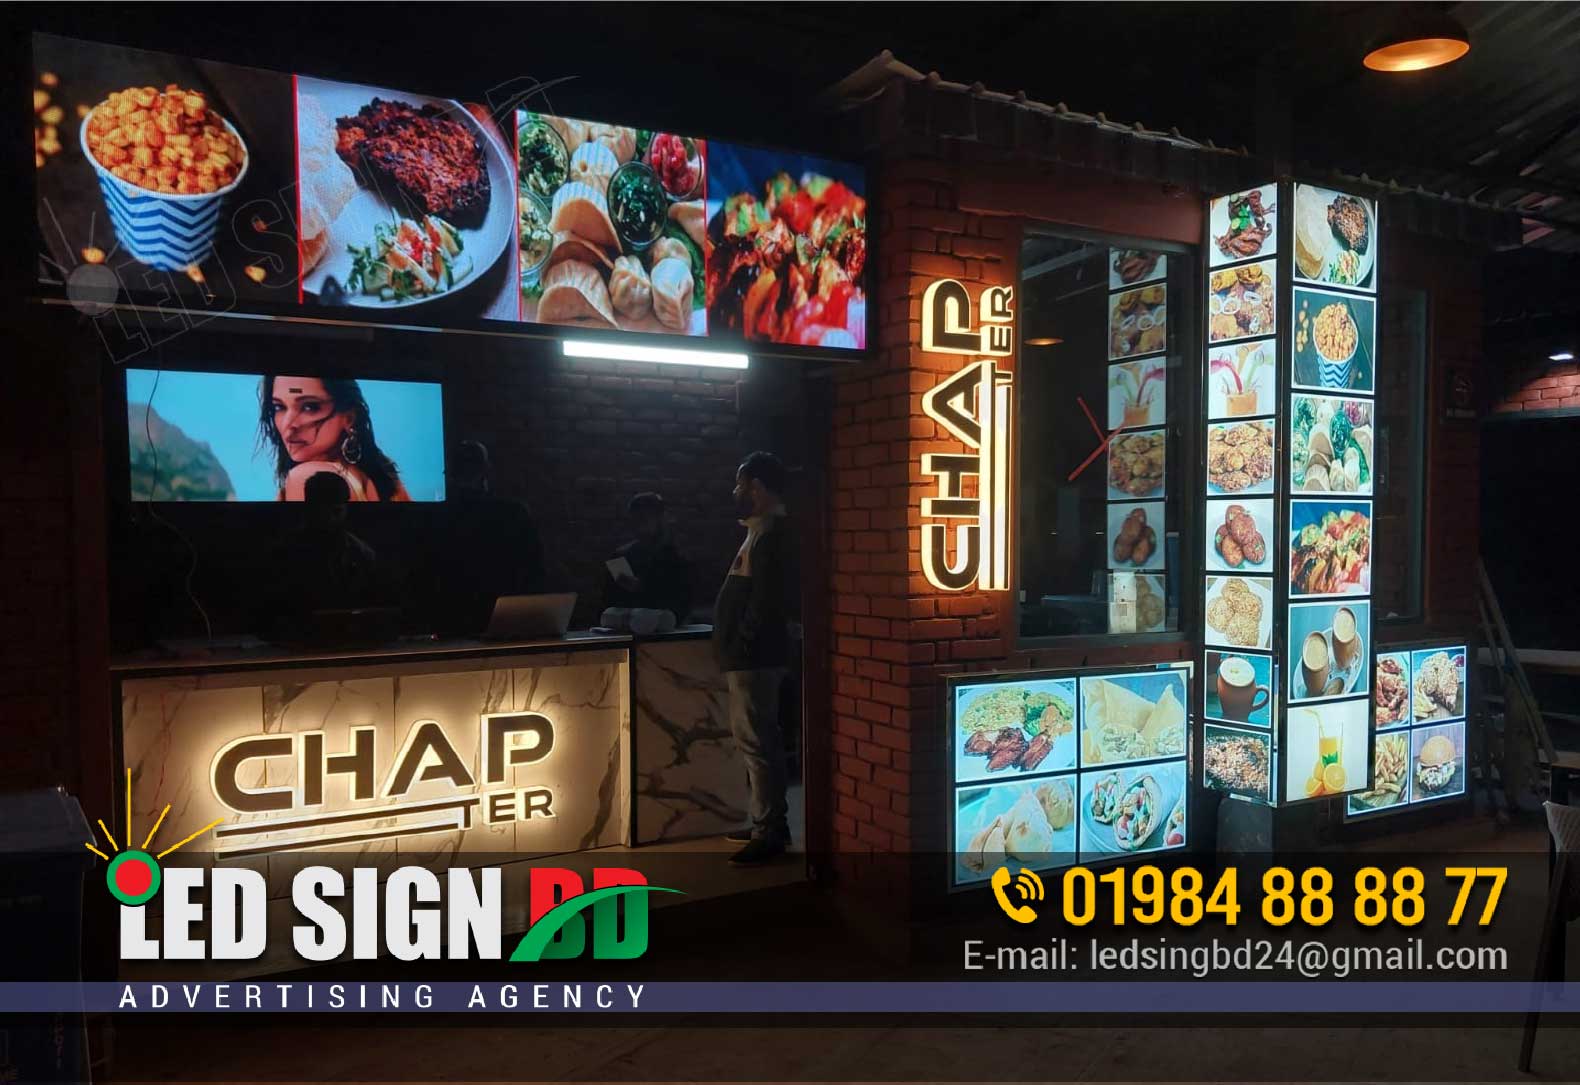 sign board restaurant. restaurant sign board design. signboard restaurant. restaurant signboard design. signboard bd. , Pana Signboard Signage company in Dhaka Bangladesh, Food Signboard, Signboard Maker in Bangladesh. Logo Name Plate Signs bd, ACP Name Plate Signage Acrylic Name Plate Signage Apartment Flat Nameplate Brass Signage Nameplate Fire Evacuation Nameplate Signage Fire Exit Nameplate Signage Hospital Nameplate Led Nameplate Signage Lift Nameplate Signage Liquid Acrylic Letters Nameplate Neon Nameplate Signage Office Internal Nameplate Signage Parking Nameplate Signage Pylon Nameplate Signage Reception Nameplate Signage Reflective Nameplate Signage School & Collage Nameplate SS Etching Nameplate Signage Stainless Steel Nameplate Signage Terrace Nameplate Signage Toilet Nameplate Signage Unipole Logo Nameplate Signage Wall Graphics Nameplate Signage Wooden Name Plate Name Signage Shop